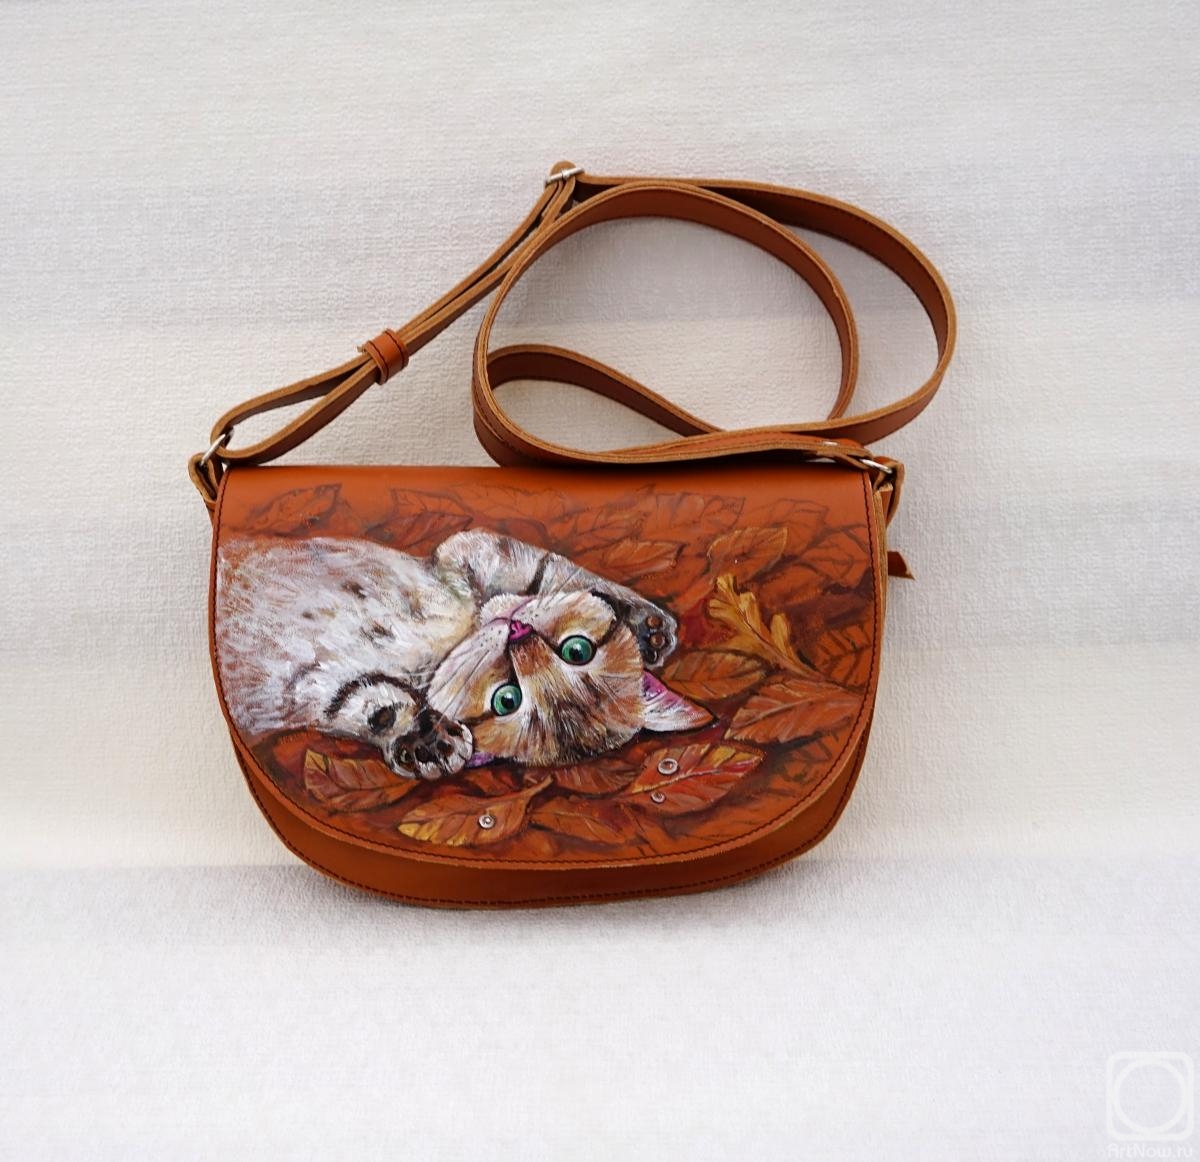 Zarechnova Yulia. Leather bag with painting " Kitten in leaves"